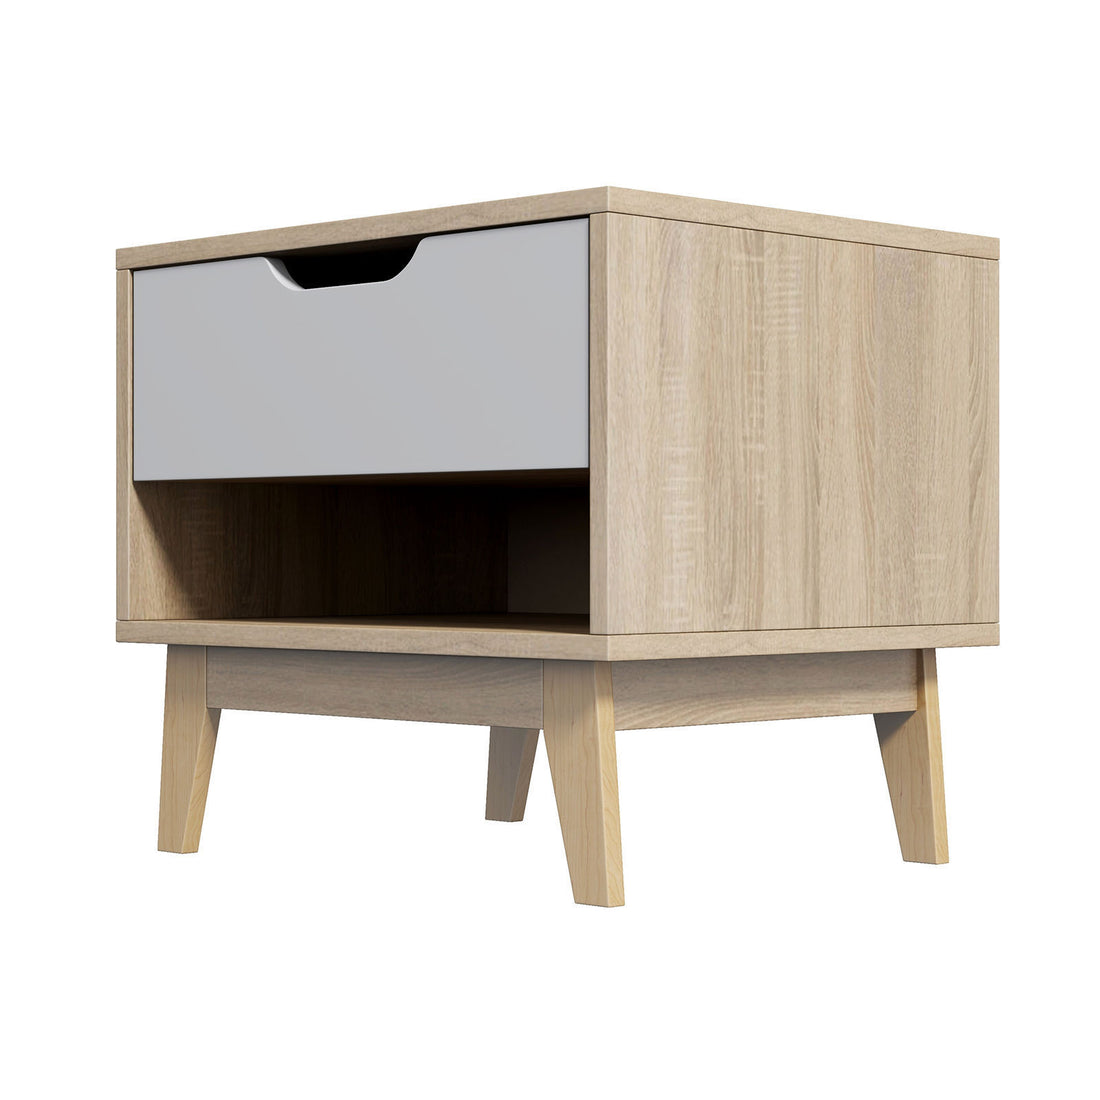 Milano Decor Bedside Table Manly Drawers Nightstand Unit Cabinet Storage-Bedside Tables-PEROZ Accessories